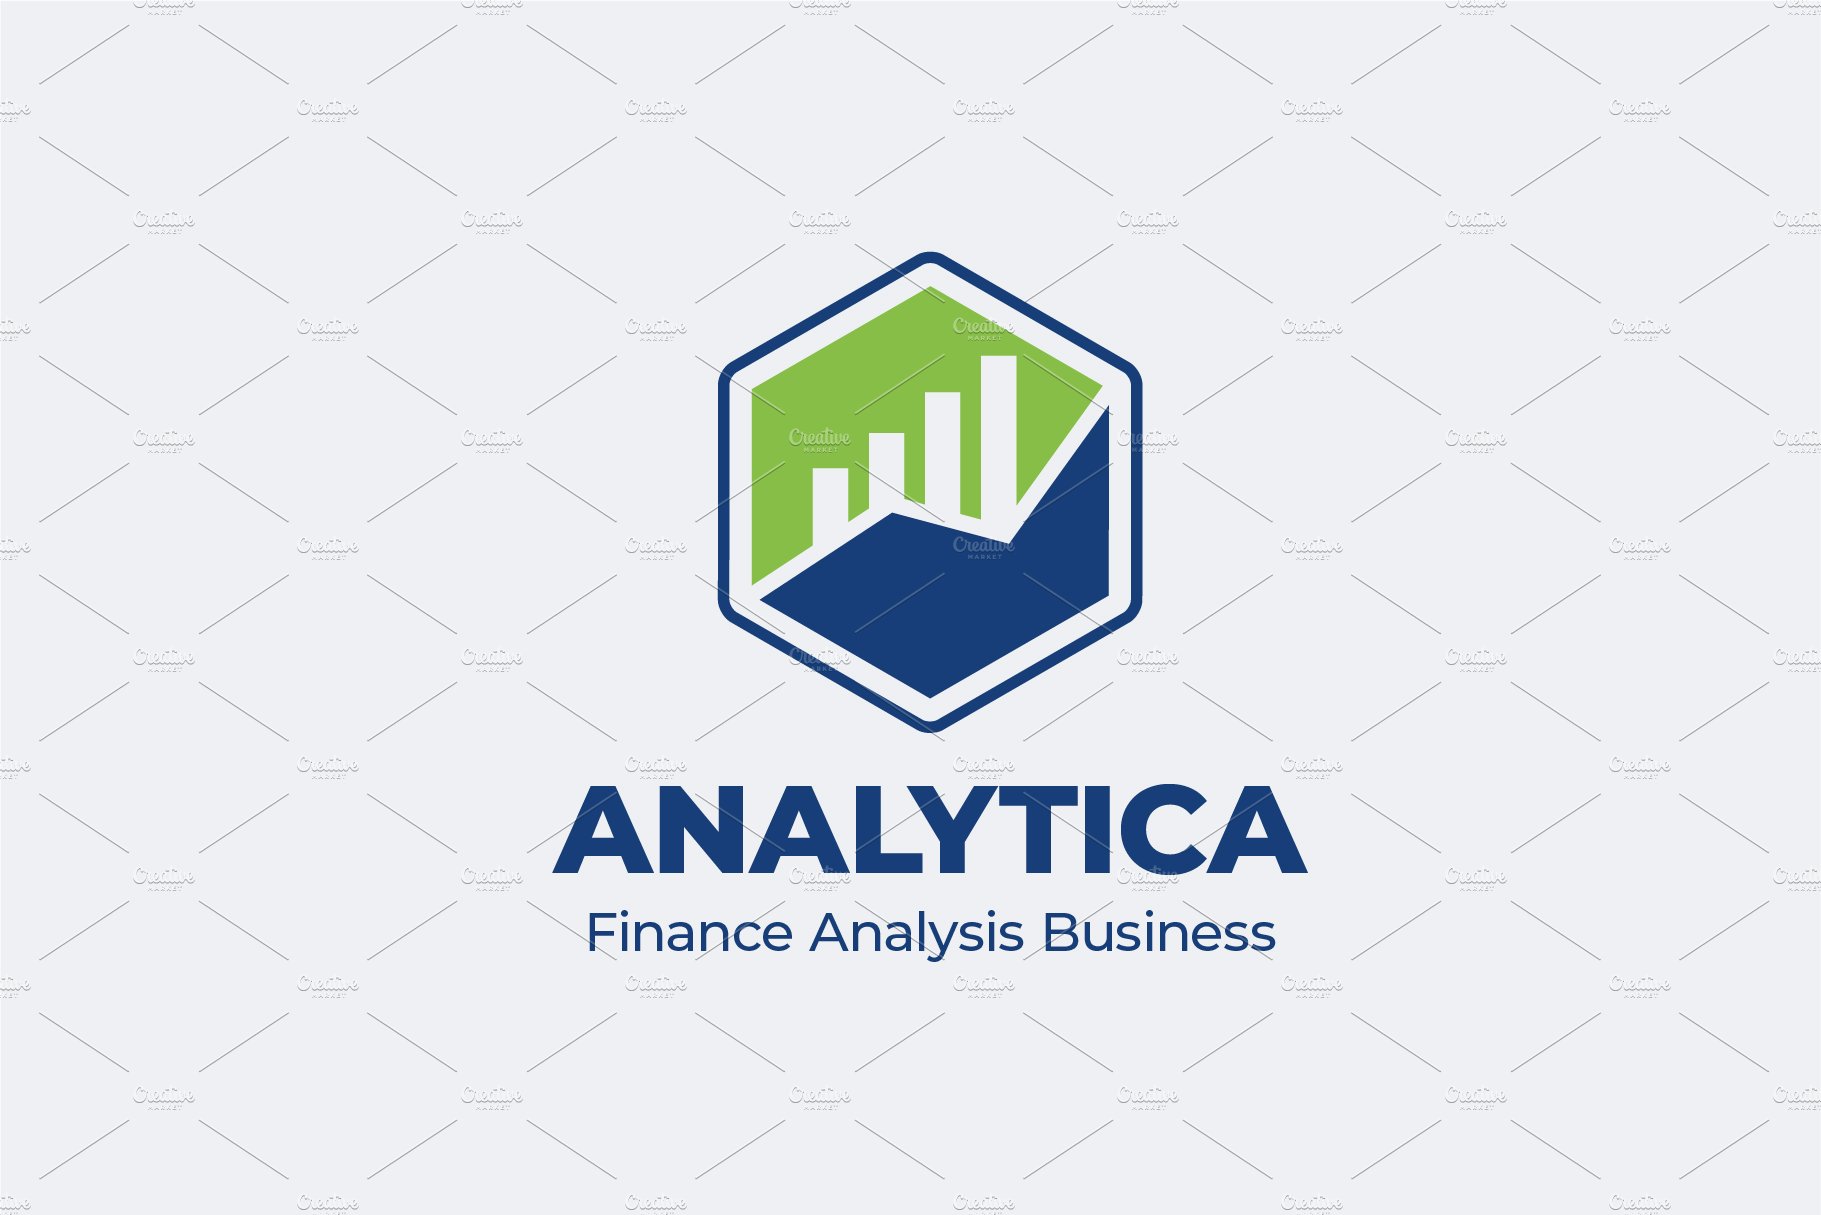 Analytica Logo Template cover image.